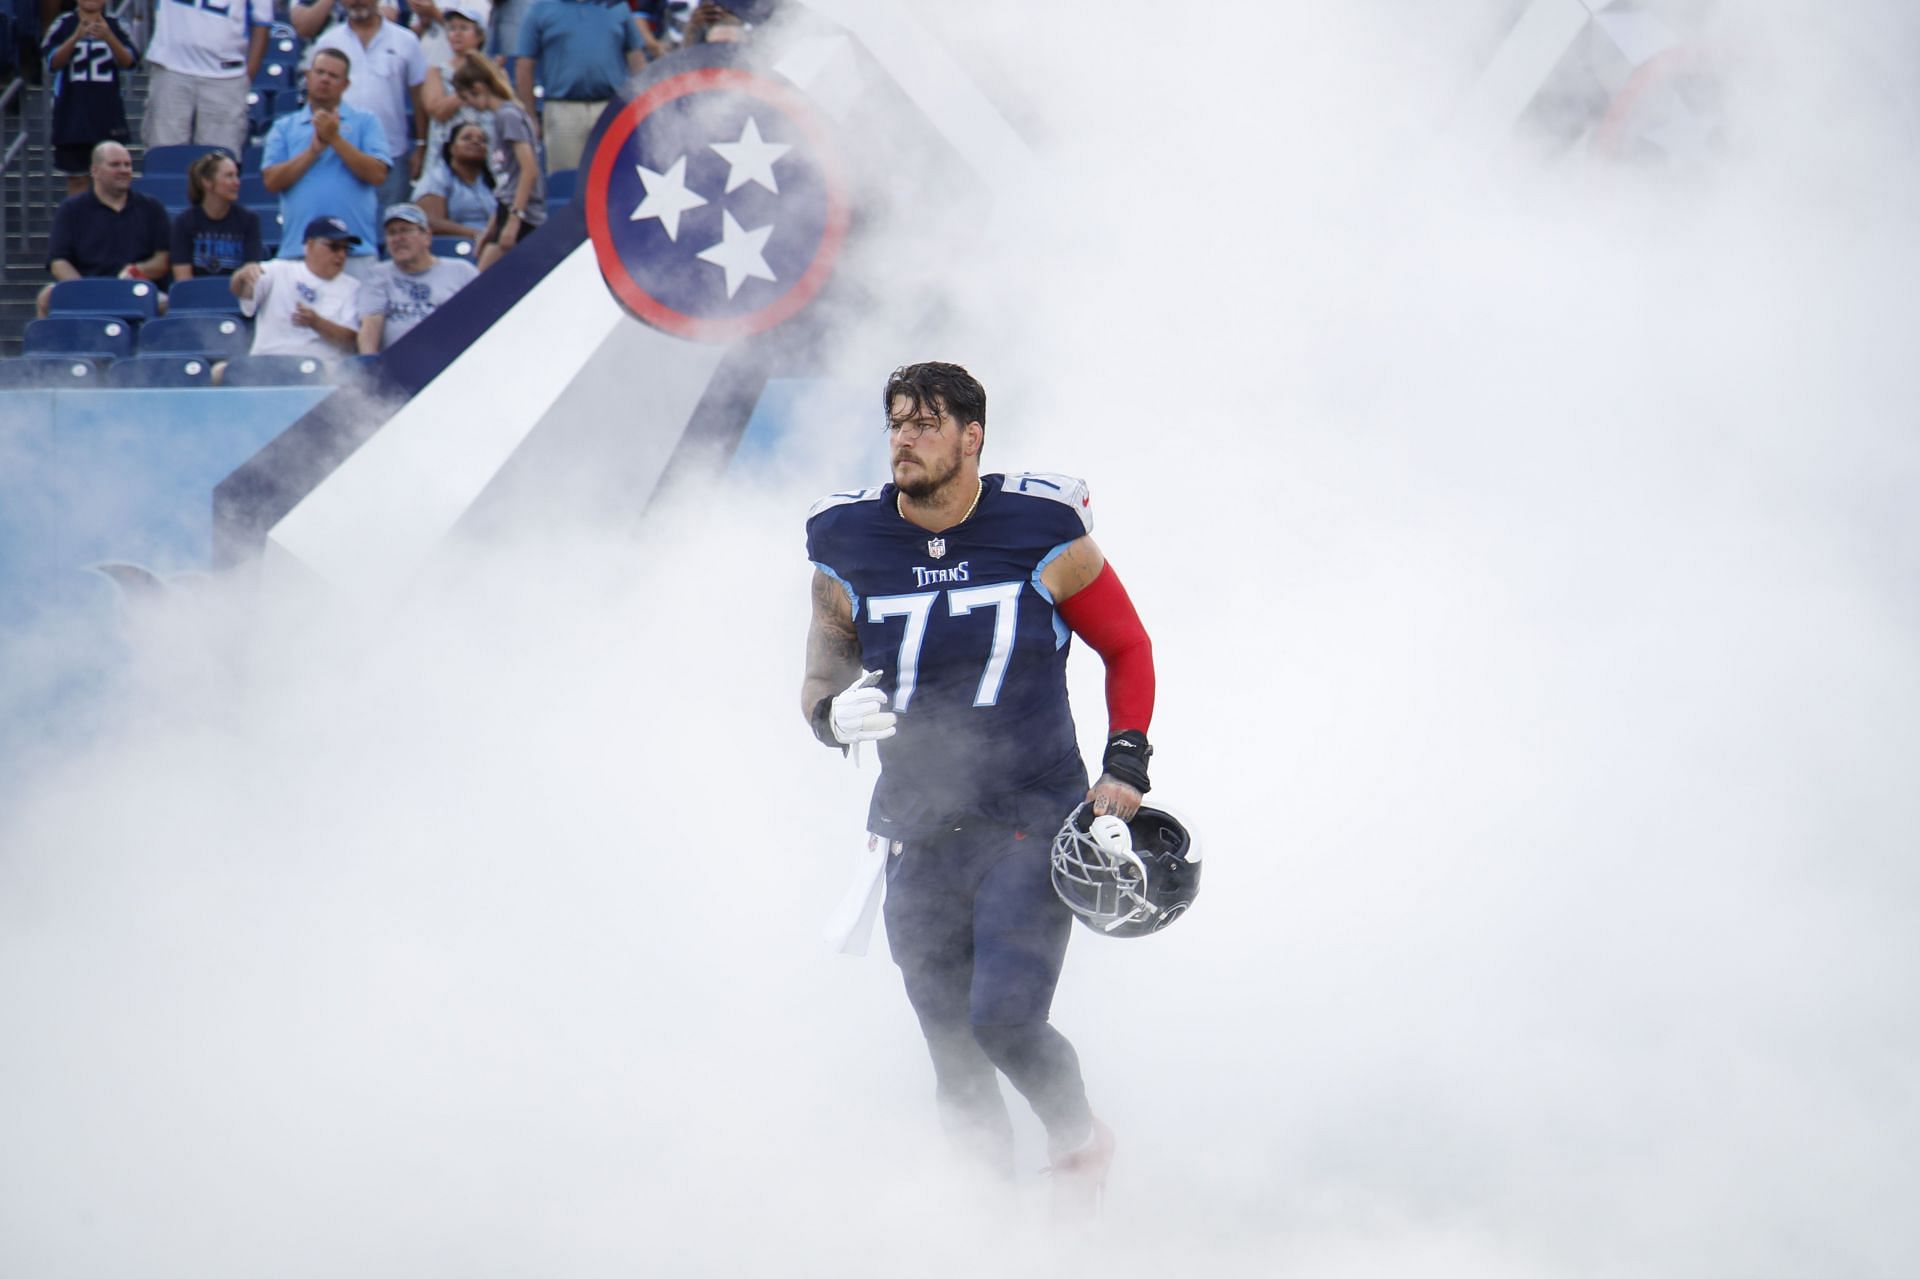 Taylor Lewan is one of the best free agents left in the NFL